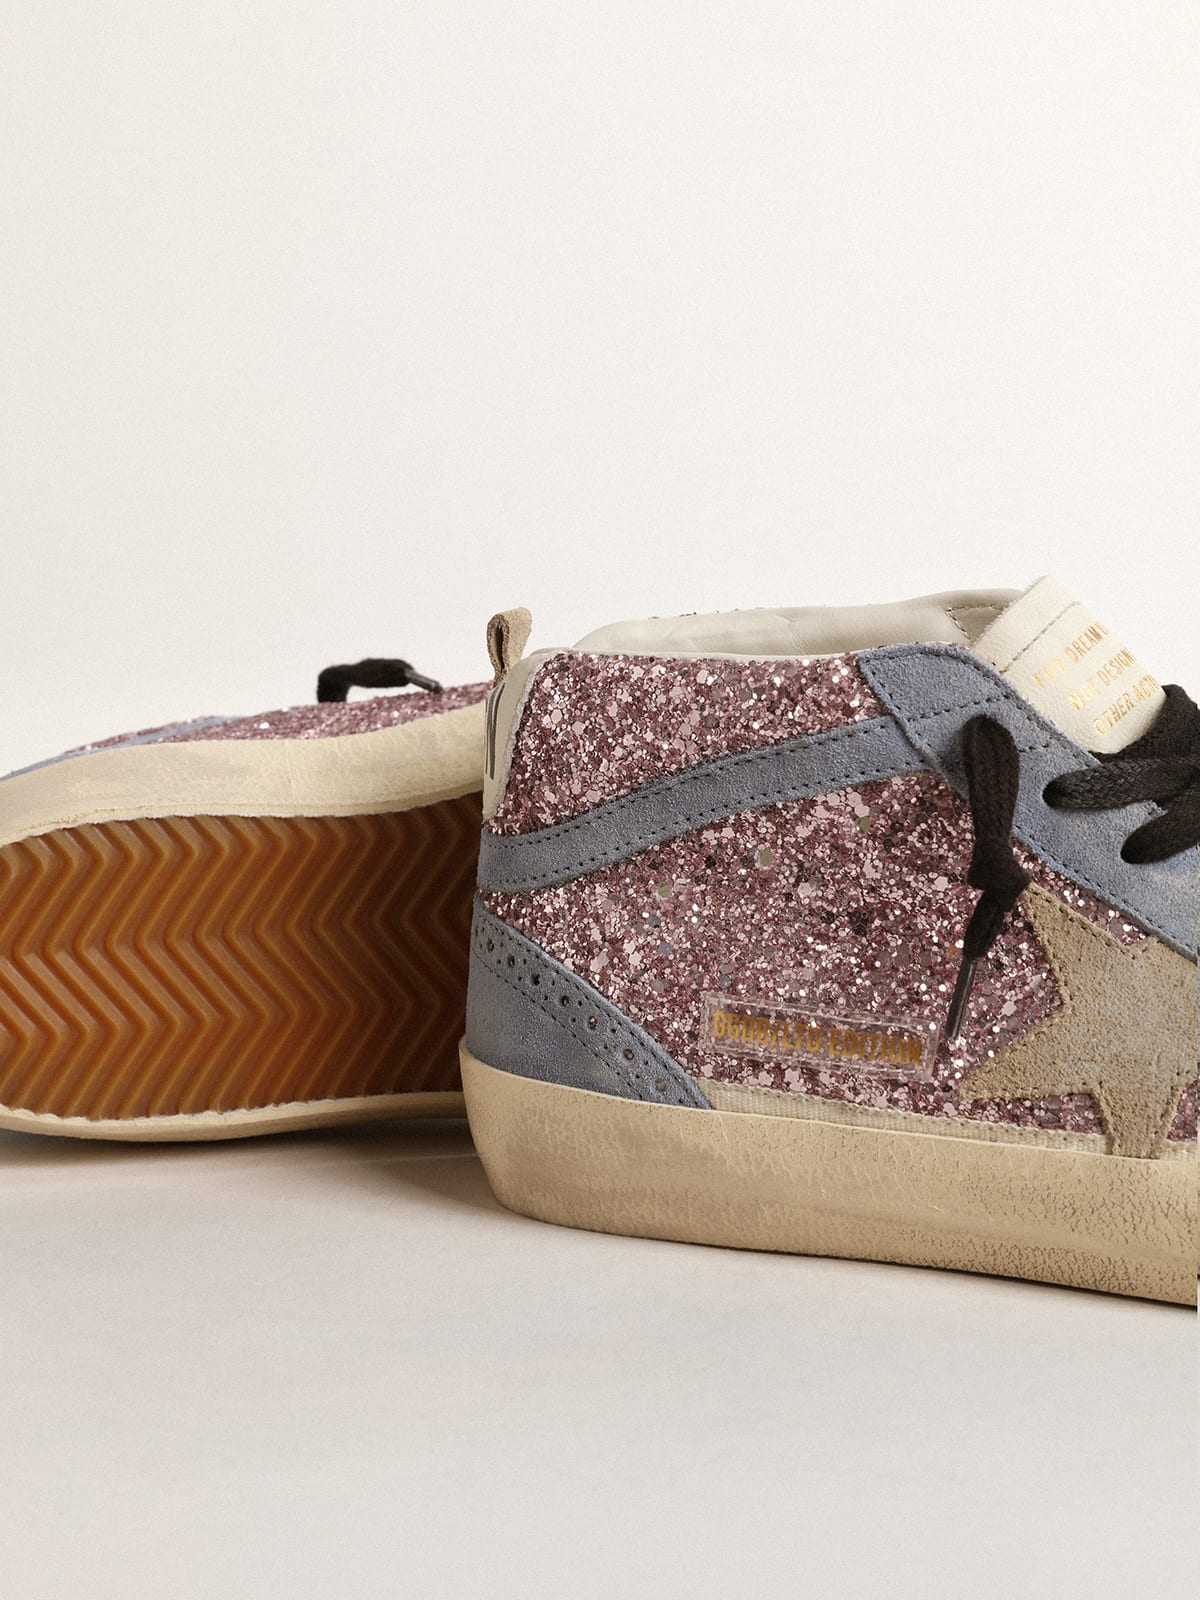 Golden Goose - Mid Star LTD in lilac glitter with light blue suede inserts in 